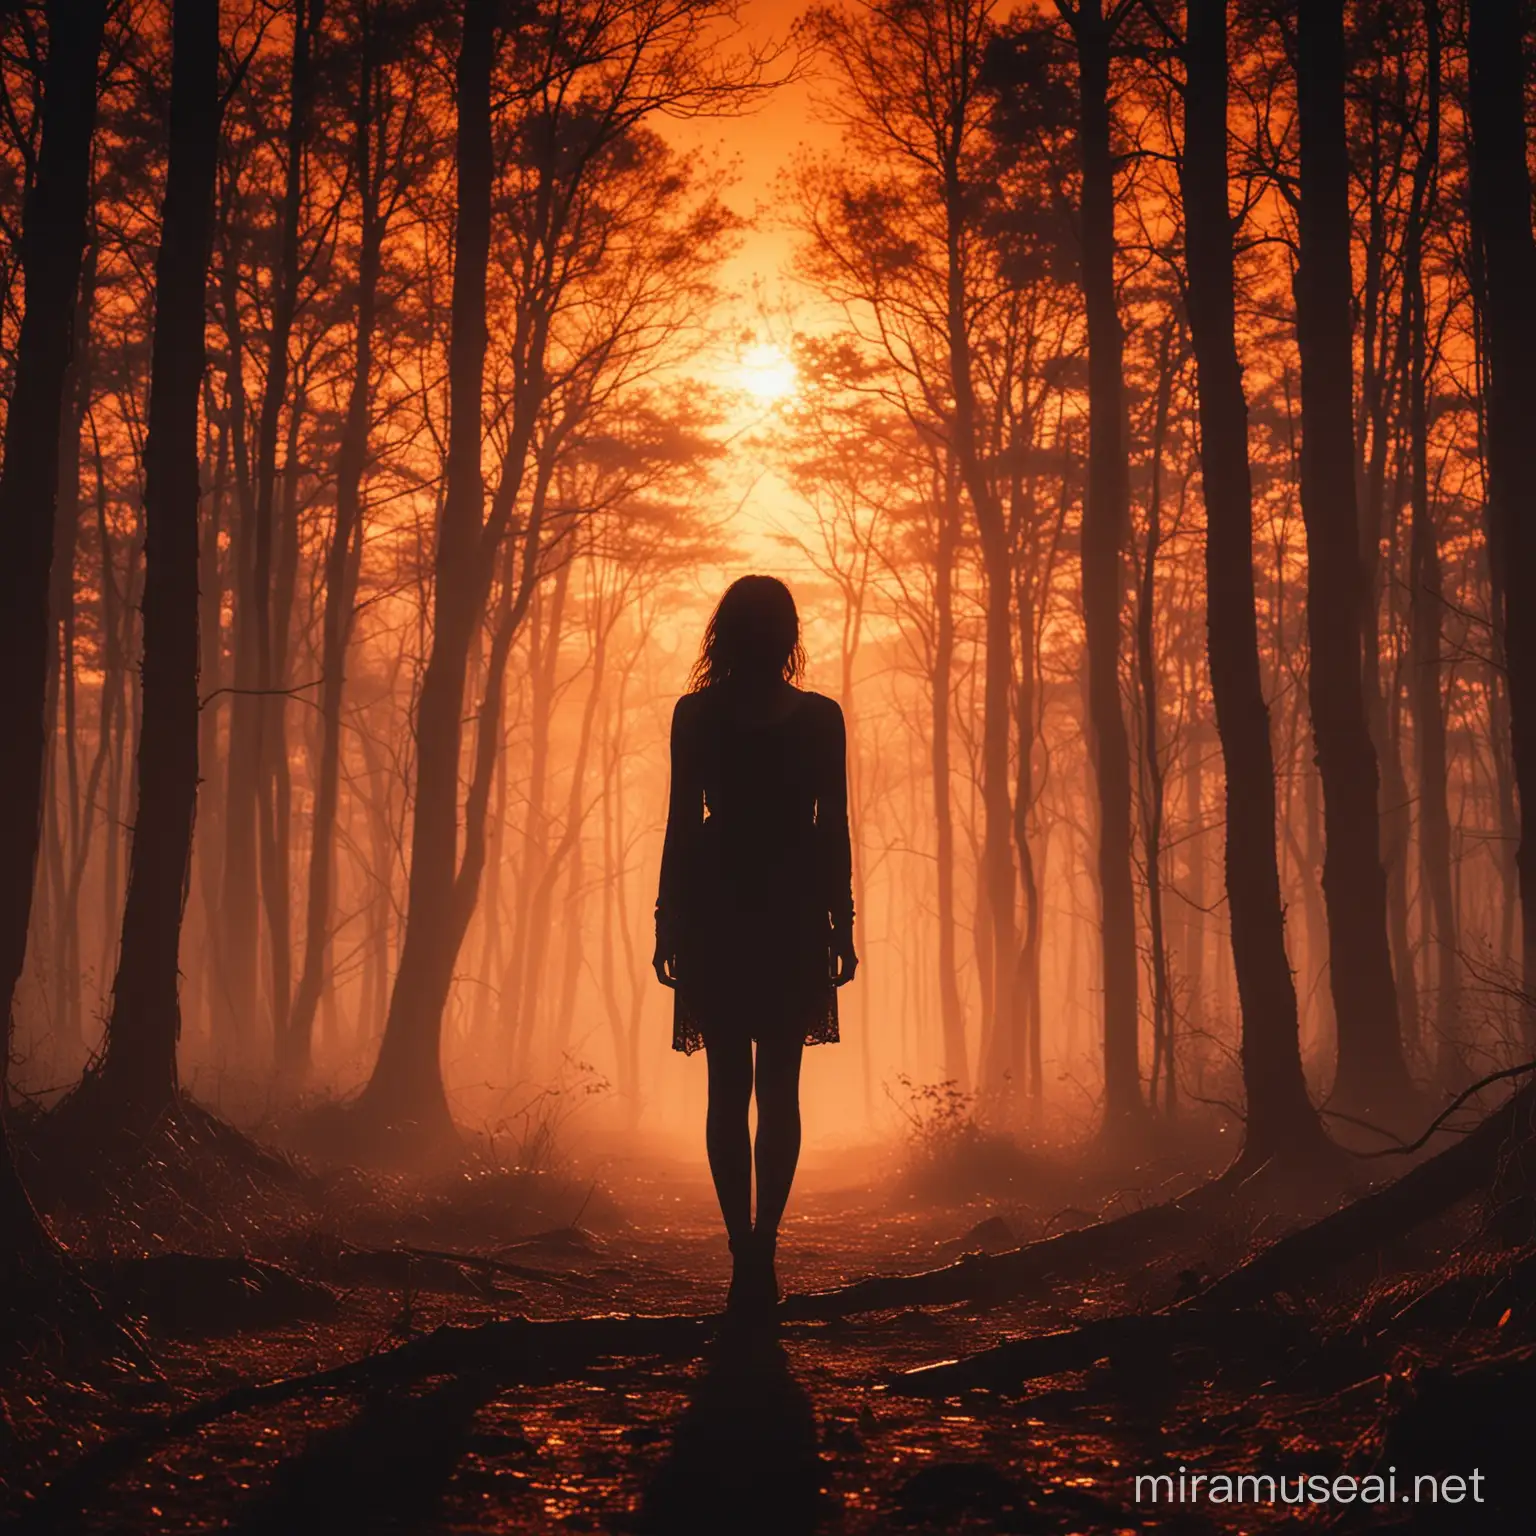 A hauntingly beautiful image of a woman standing in a dimly lit forest at sunset. Her silhouette is accentuated by the spitting shadows, with her expression full of mystery. The background reveals a vibrant sky with warm hues of orange and red, as the sun sets on the horizon. The atmosphere of the image is both eerie and enchanting.